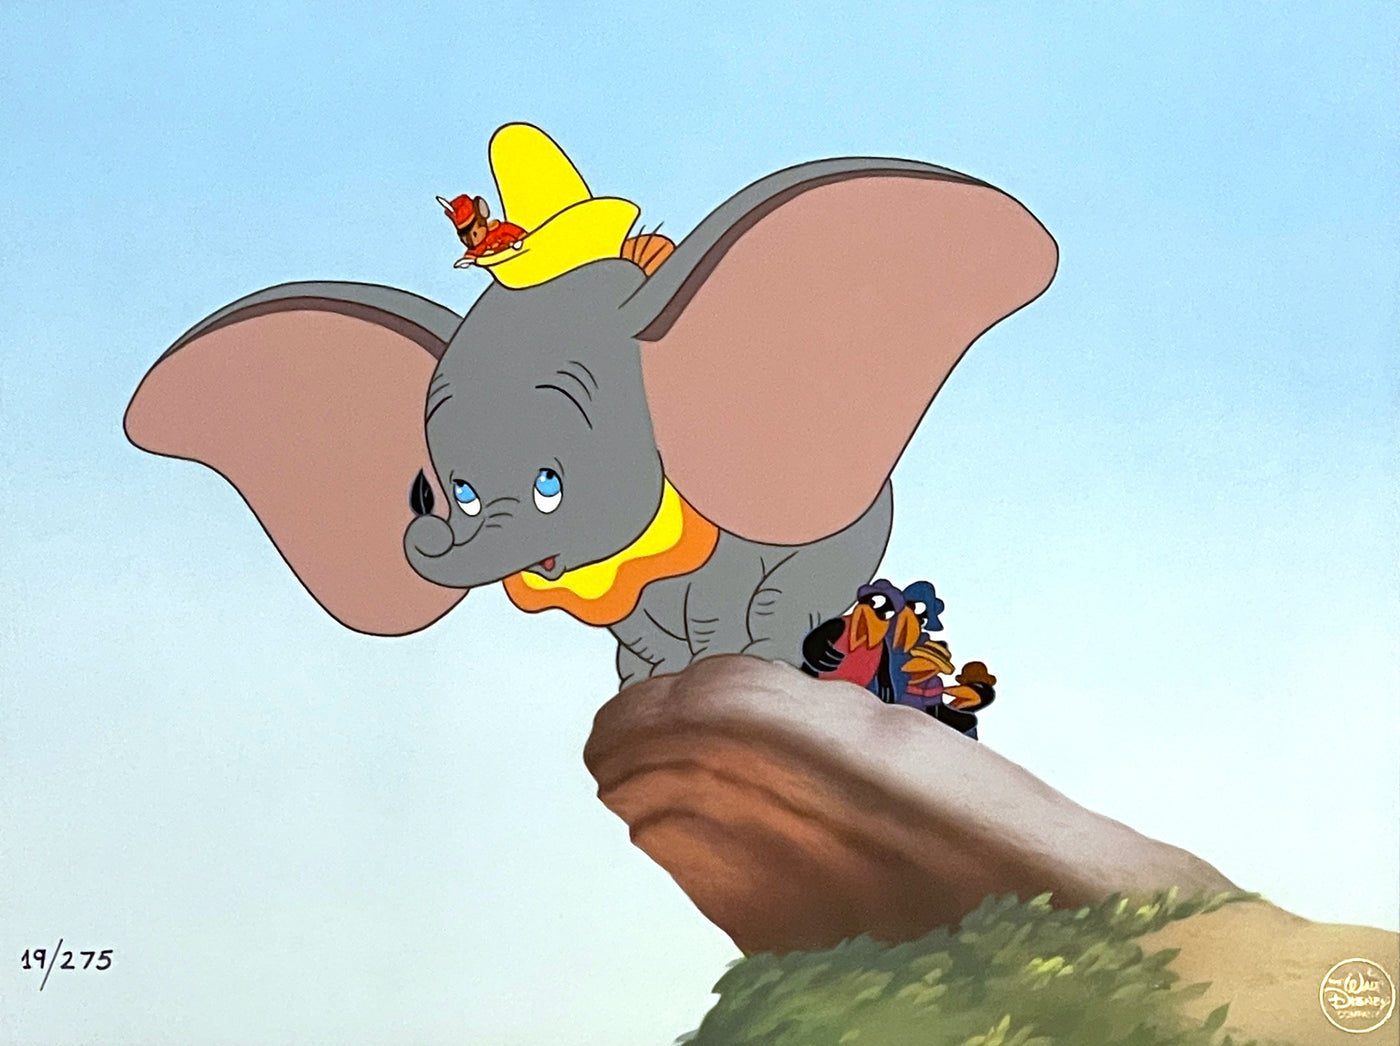 Original Walt Disney Limited Edition Cel "Learning to Fly" from Dumbo